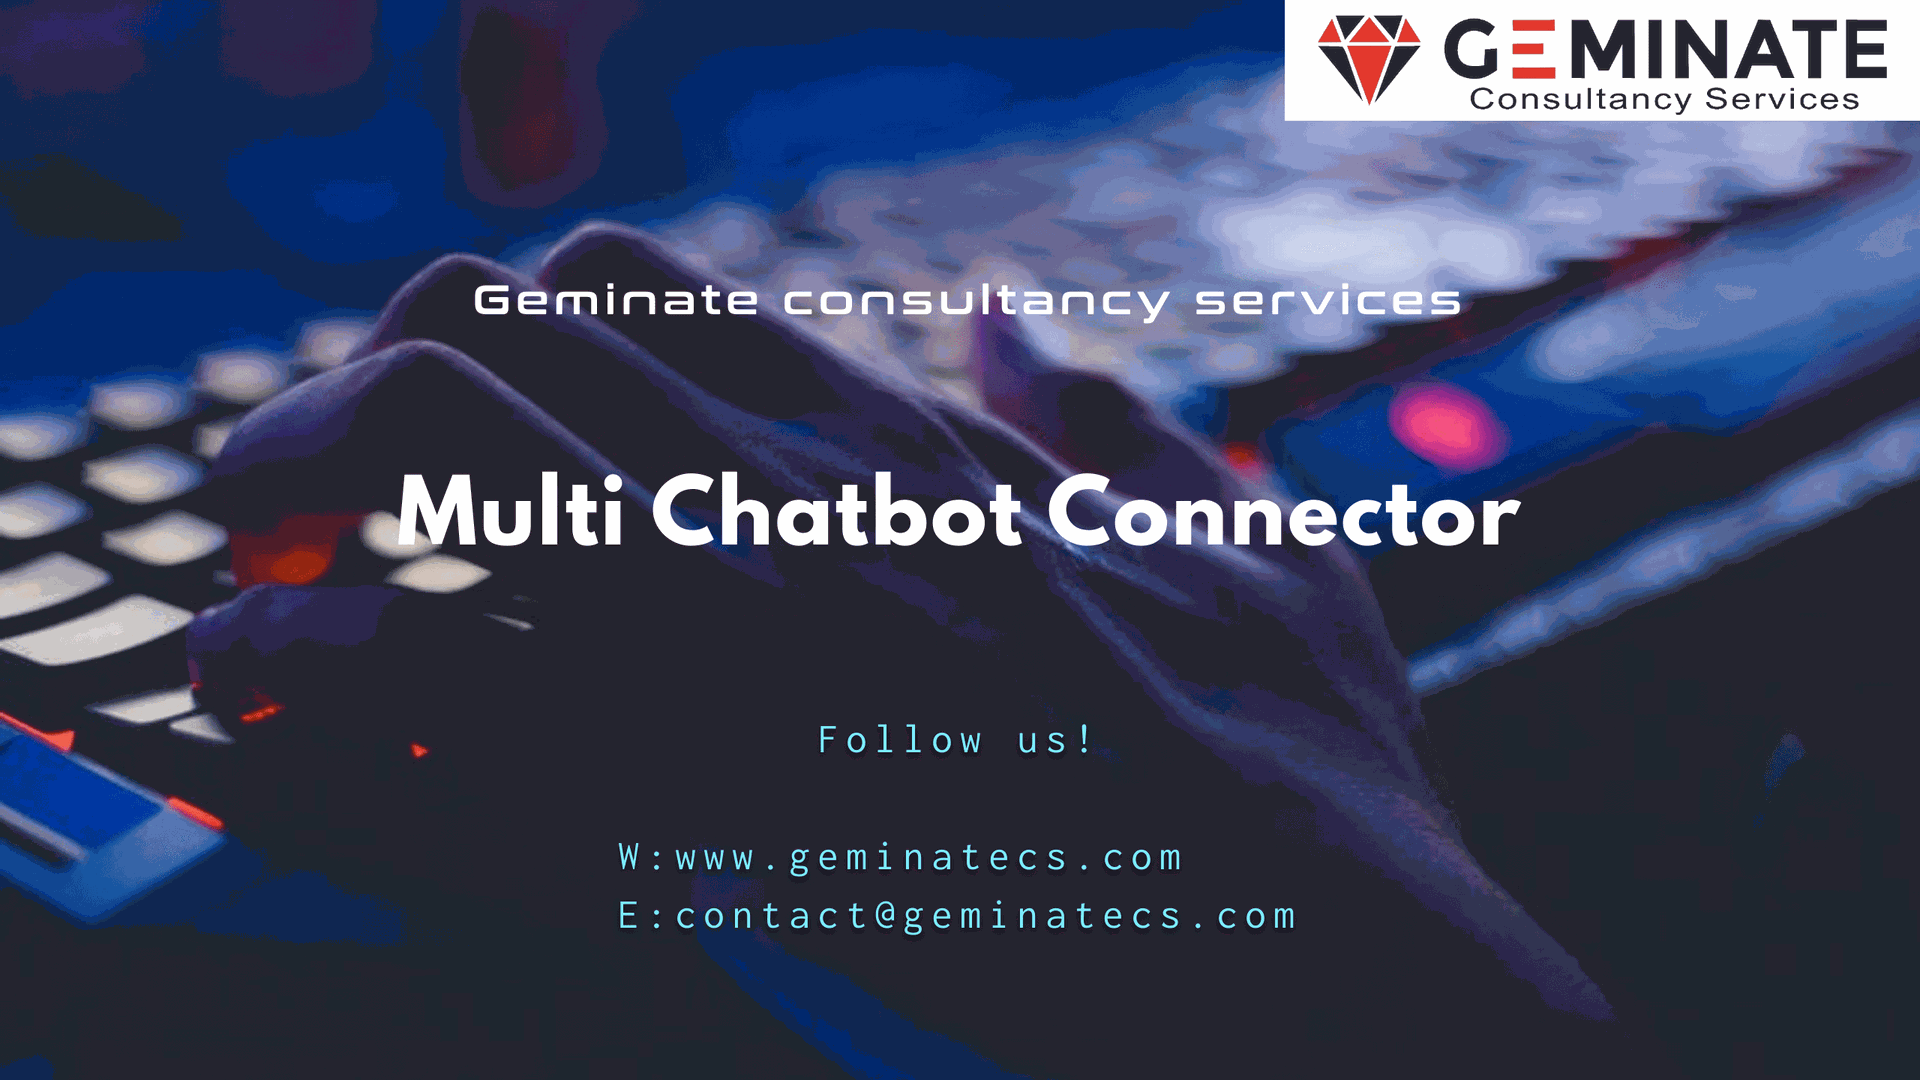 Multi Chatbot Connector